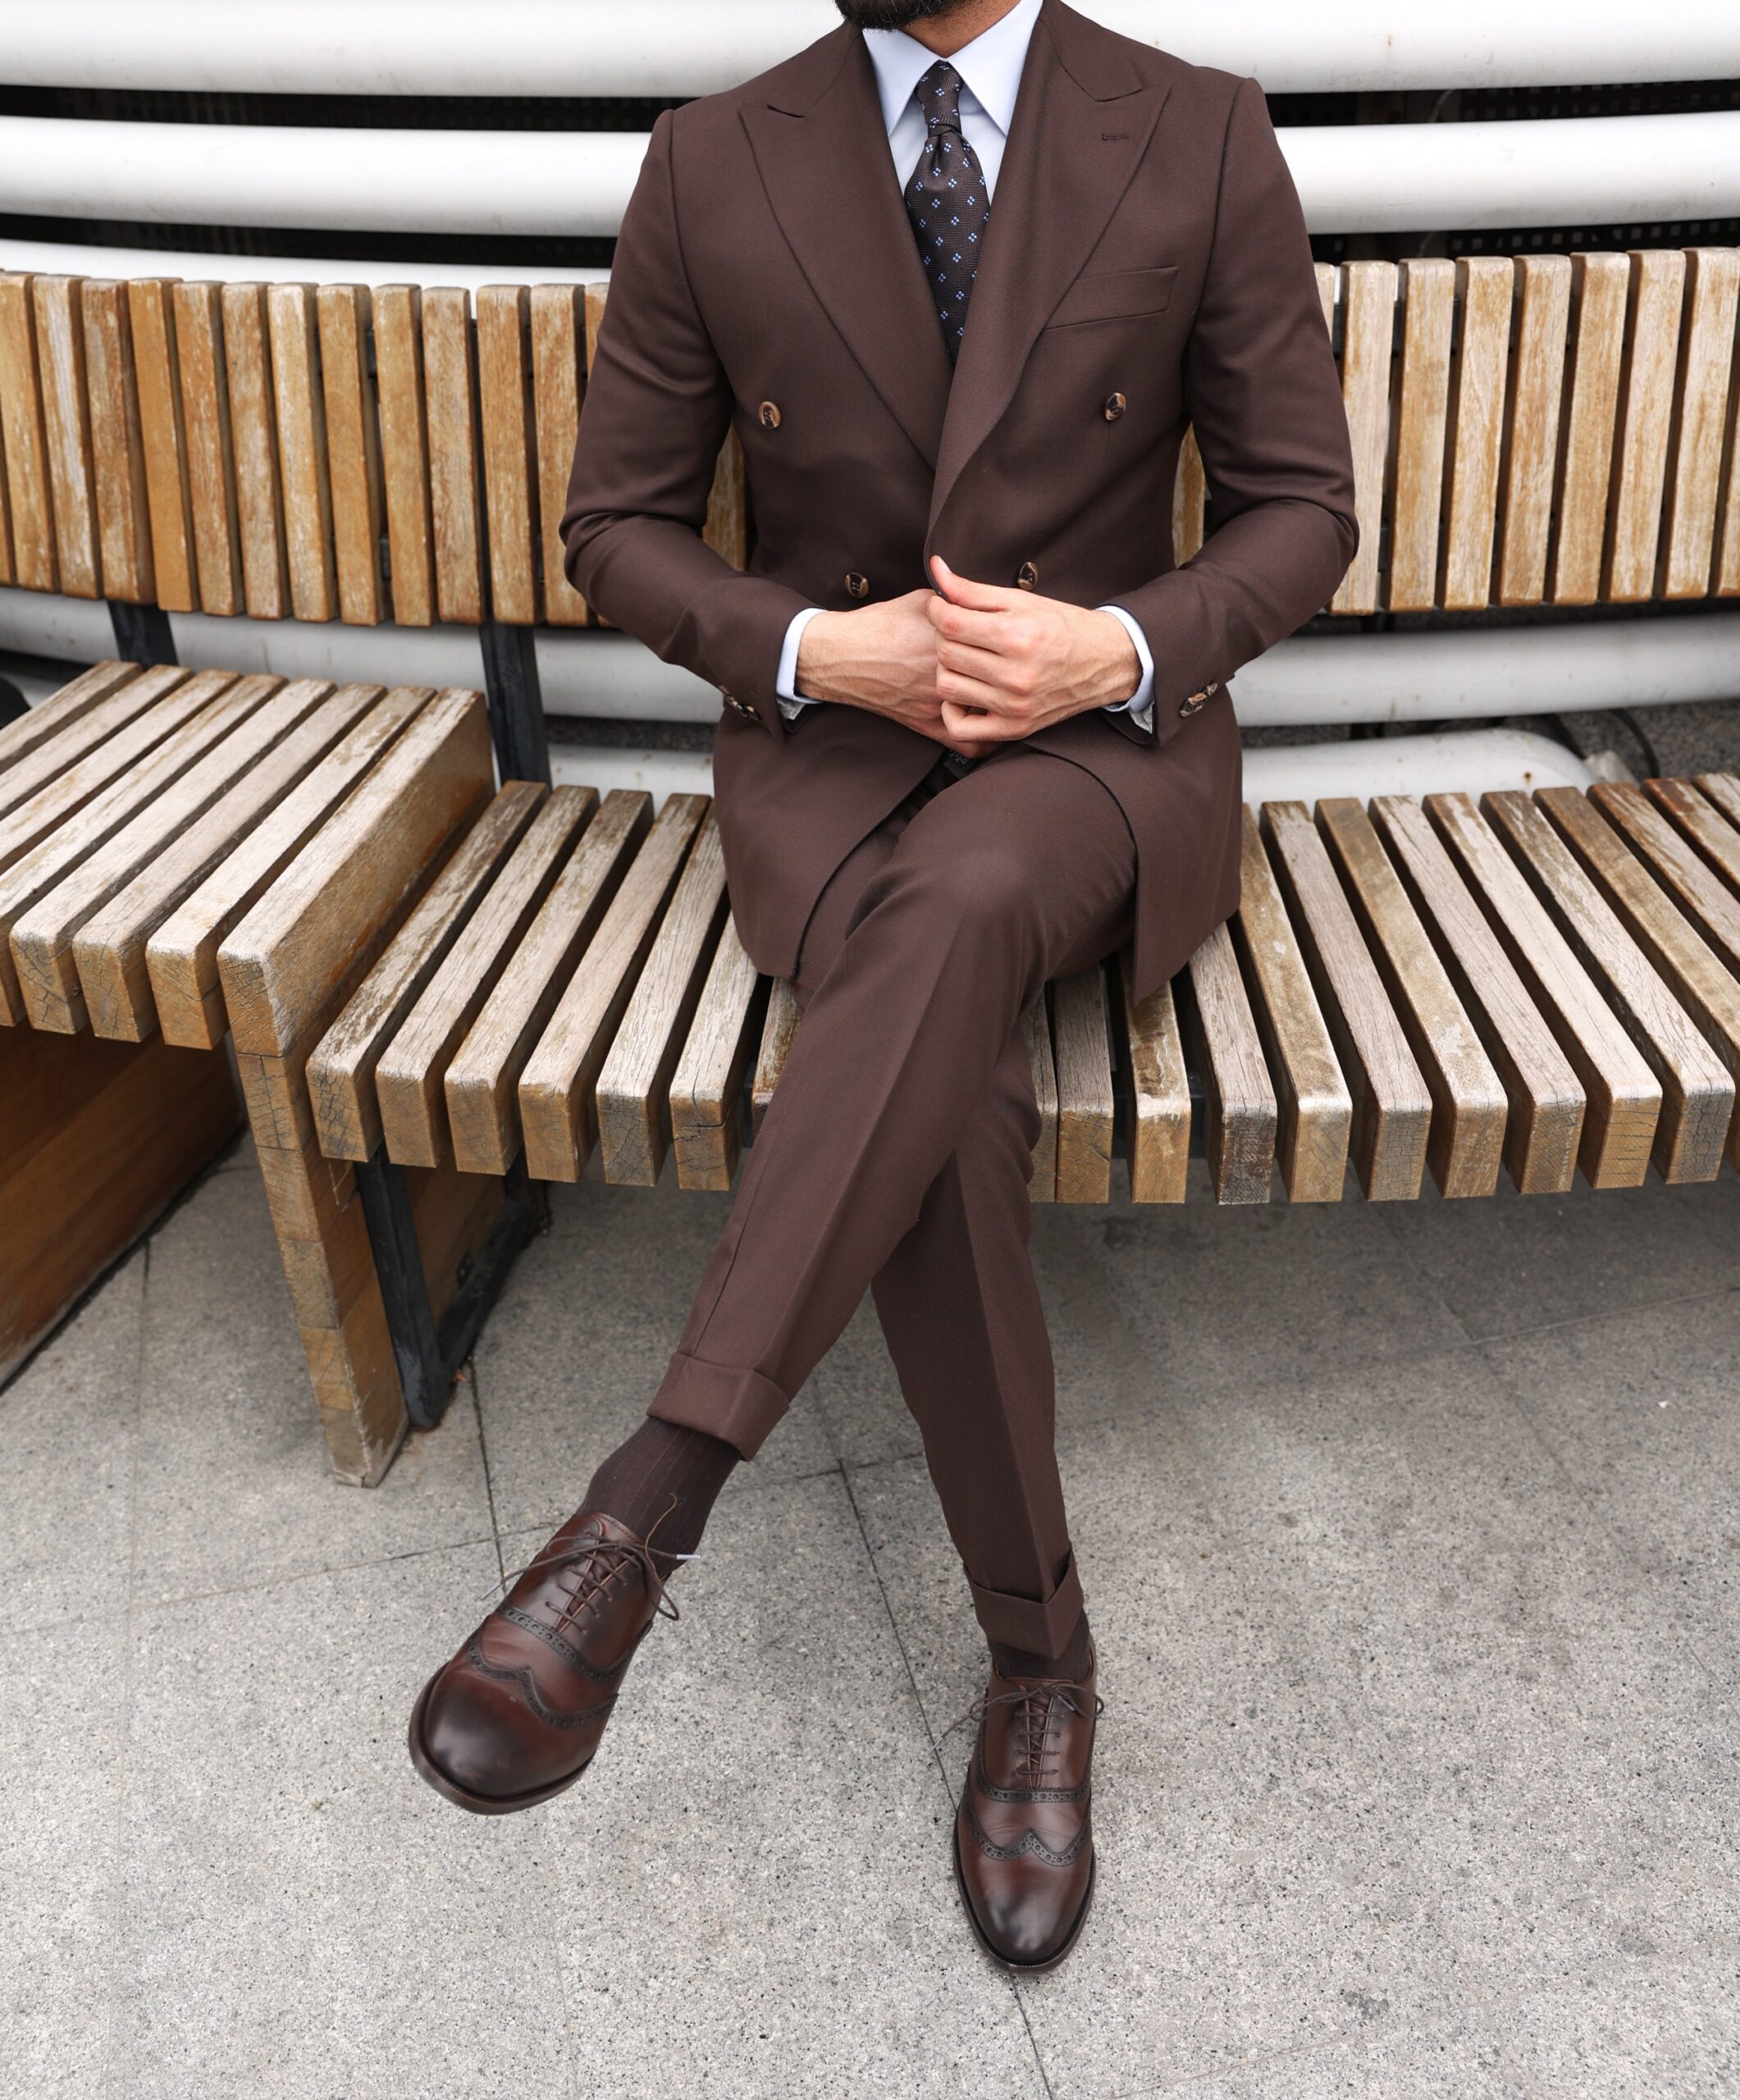 Men's Brown Suits at Daily Haute: From Light Tan to Dark Chocolate